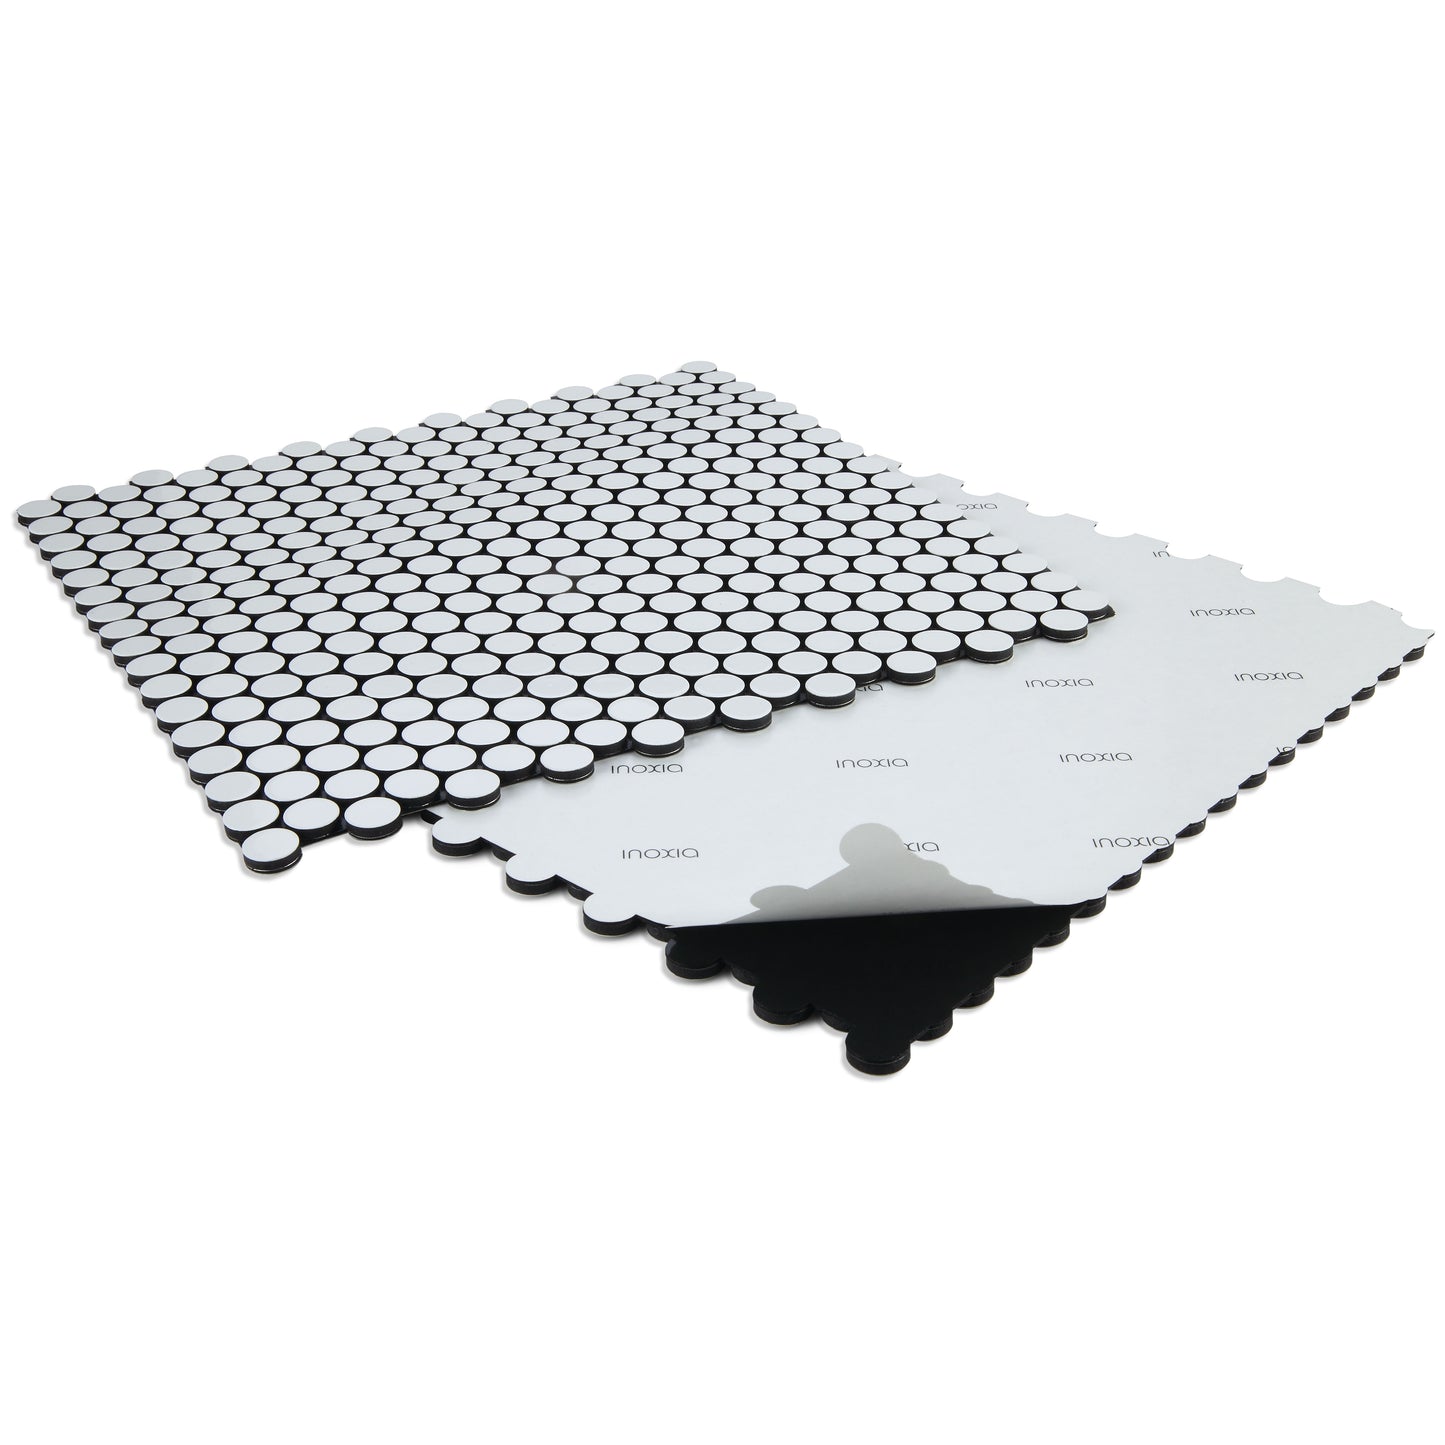 Penny WH (6-pack) SpeedTiles